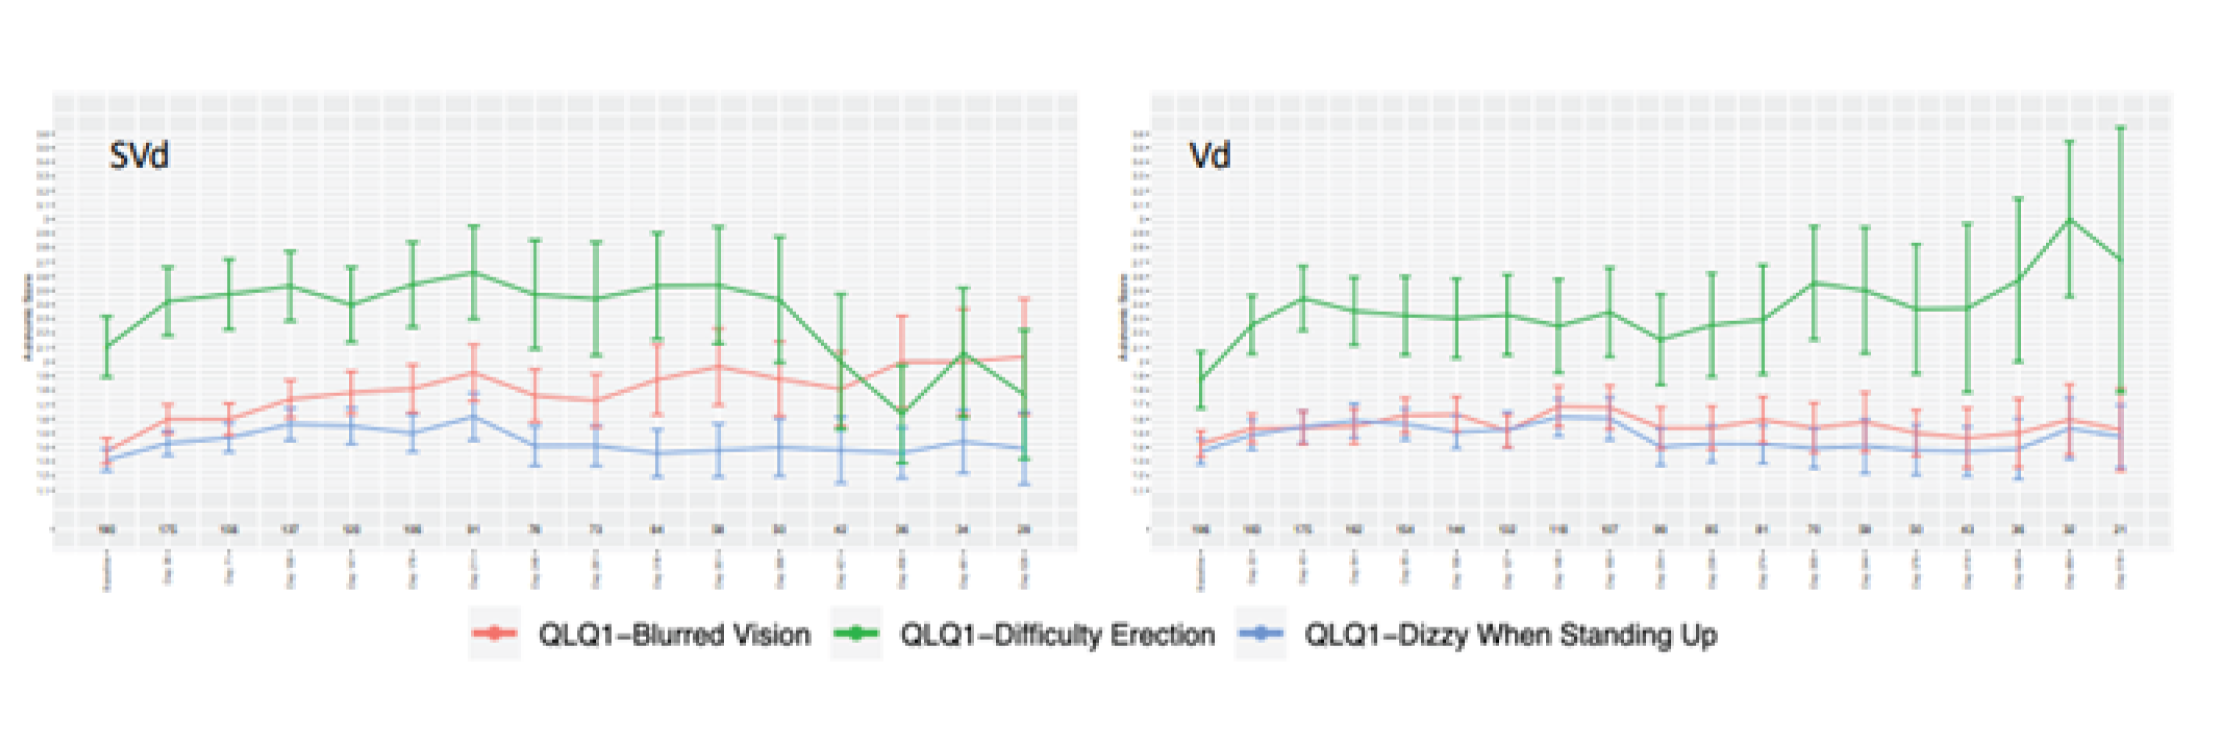 Two point estimate graphs of the results of the EORTC QLQ-CIPN20 Peripheral Neuropathy Autonomic Symptom Scores scales broken down to its 3 components of blurred vision, difficulty with erection, and dizzy when standing up for the SVd and Vd groups.